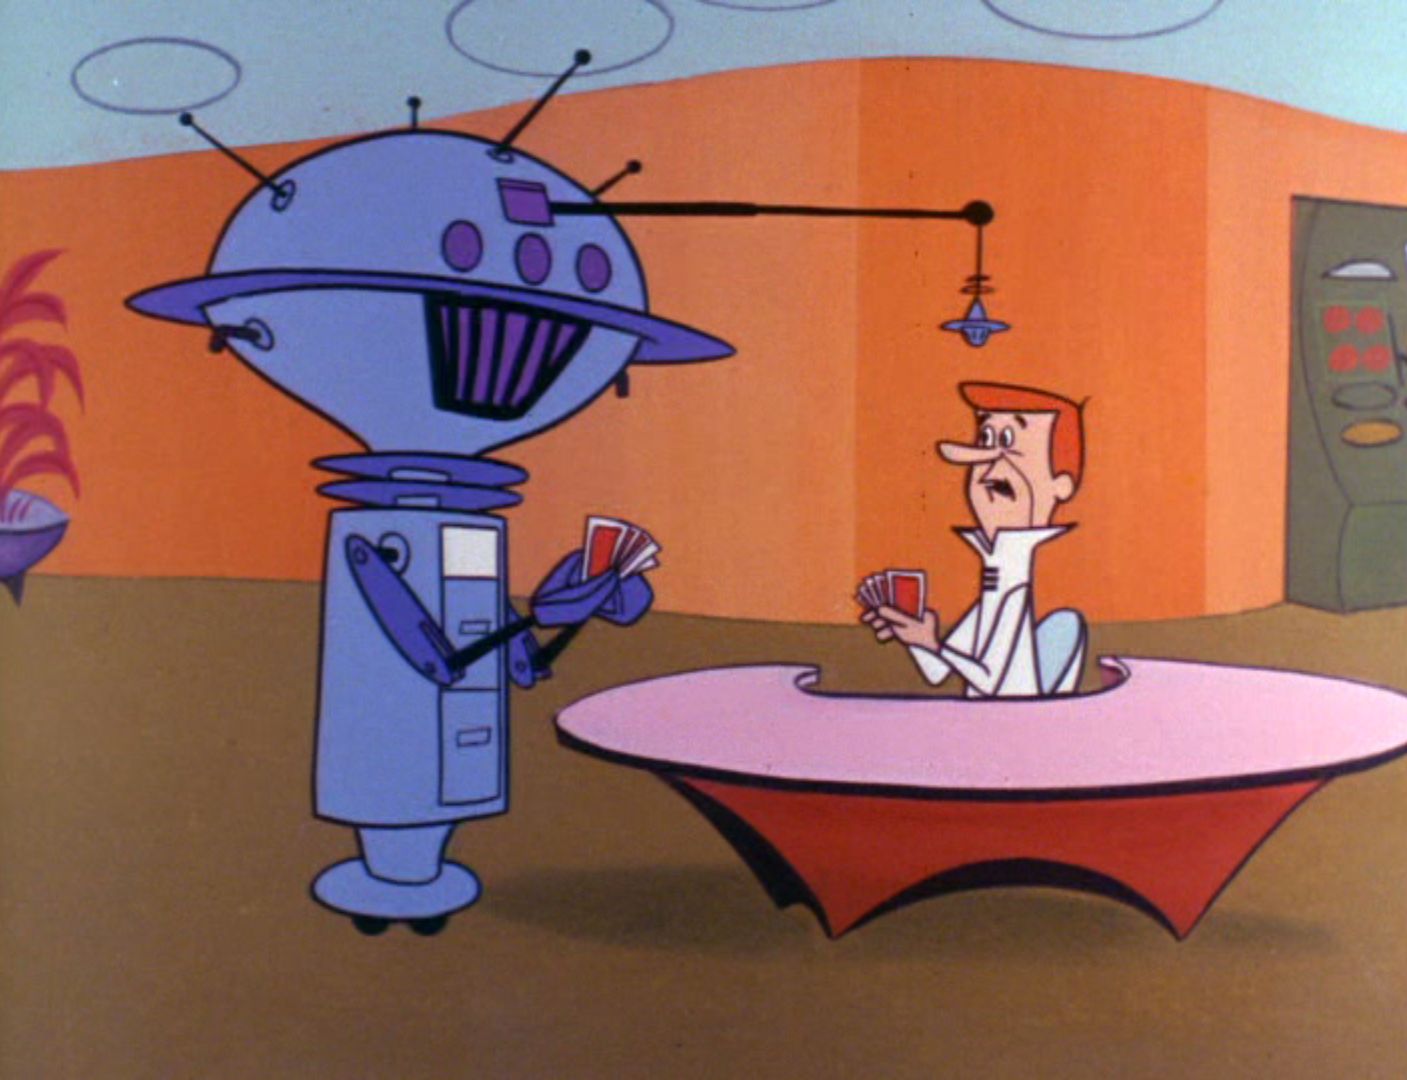 Amazon’s Astro robot is straight out of The Jetsons.